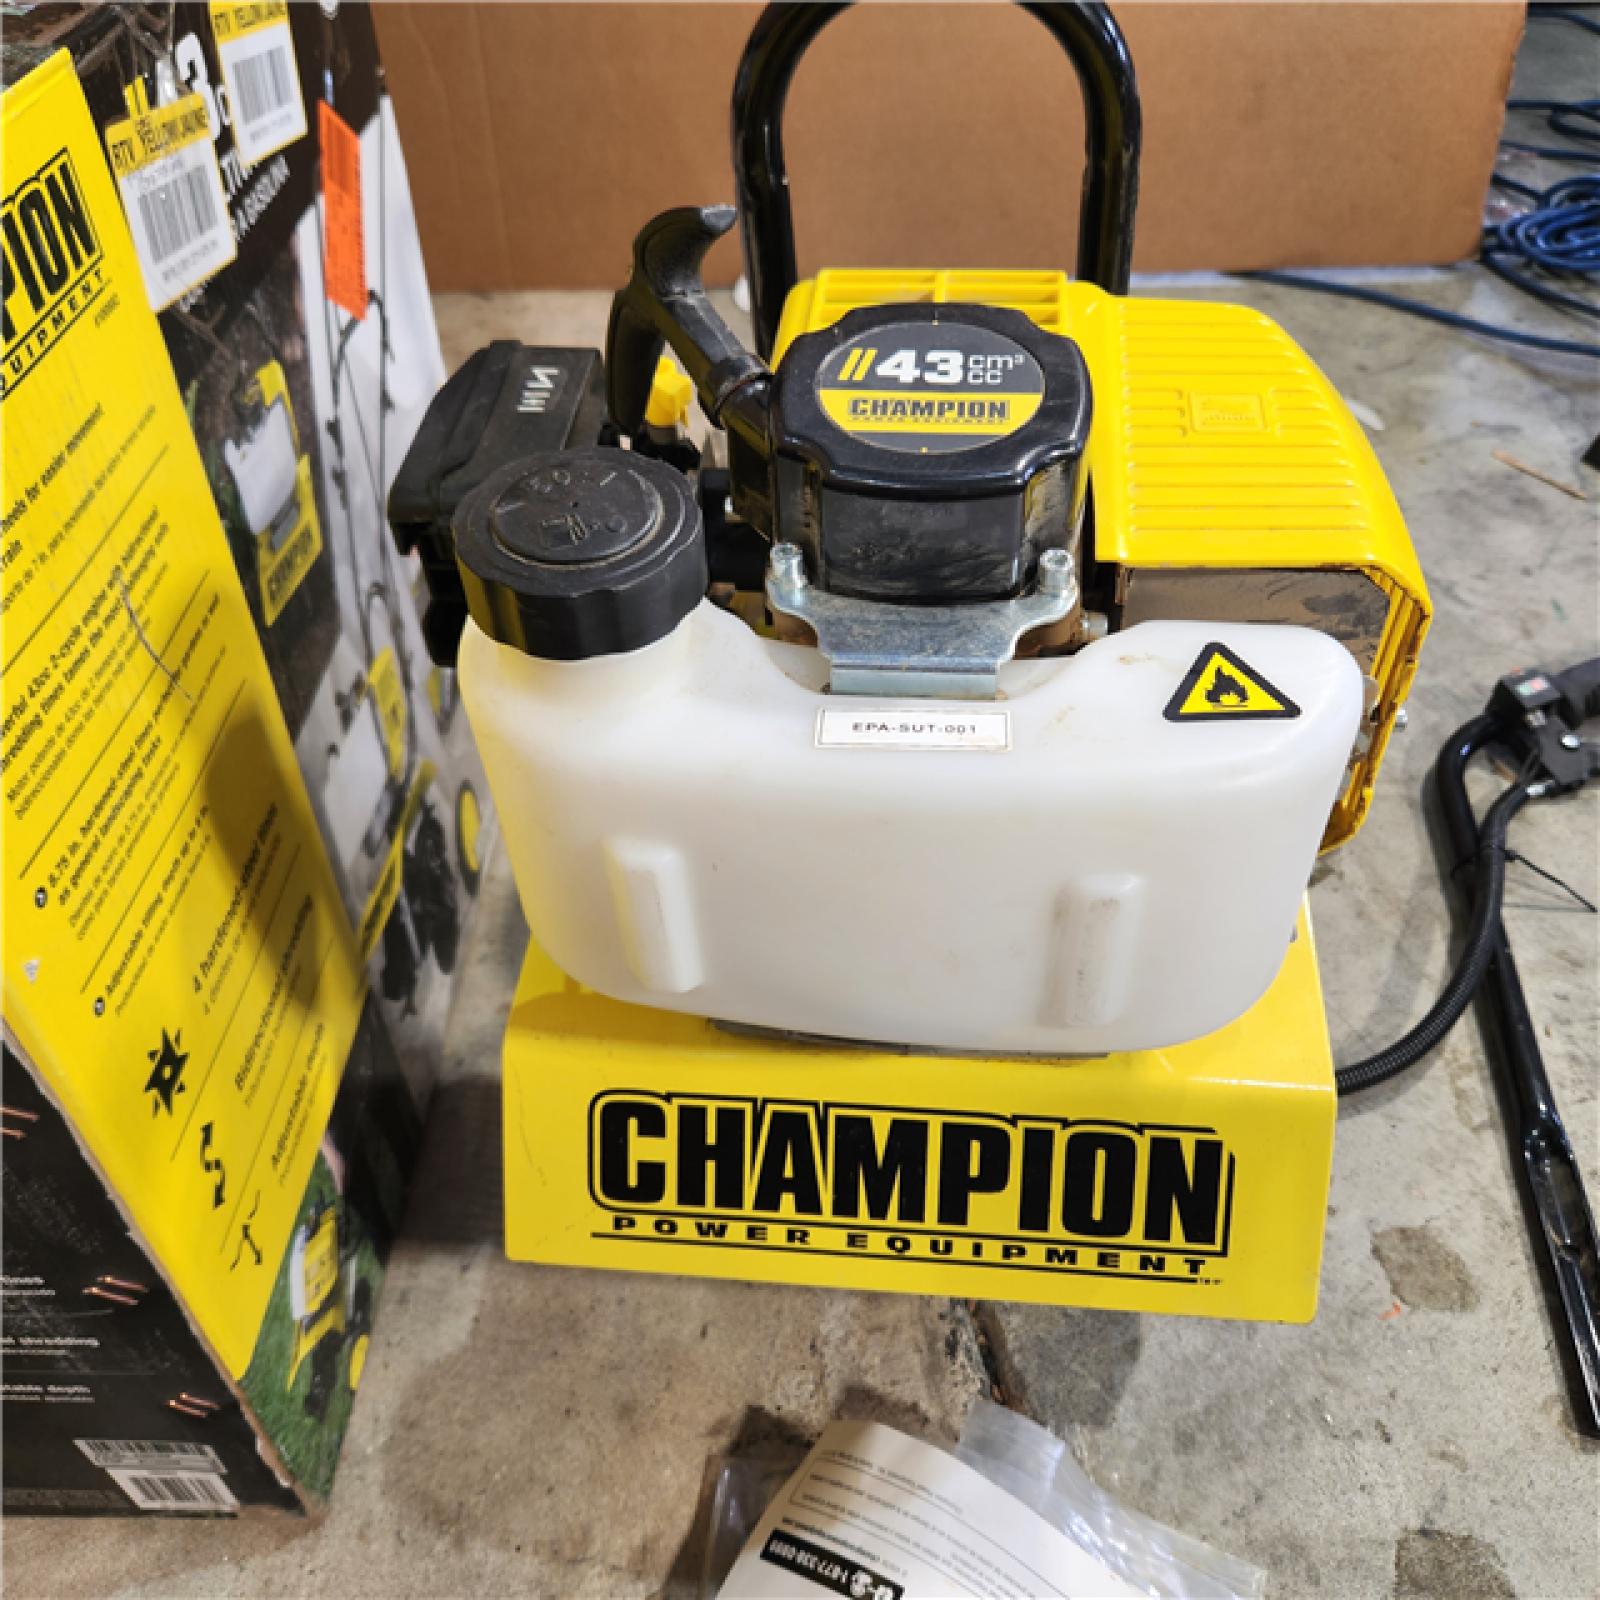 Houston location- AS-IS Champion Power Equipment 43cc 2-Stroke Portable Gas Garden Tiller Cultivator with Adjustable Depth